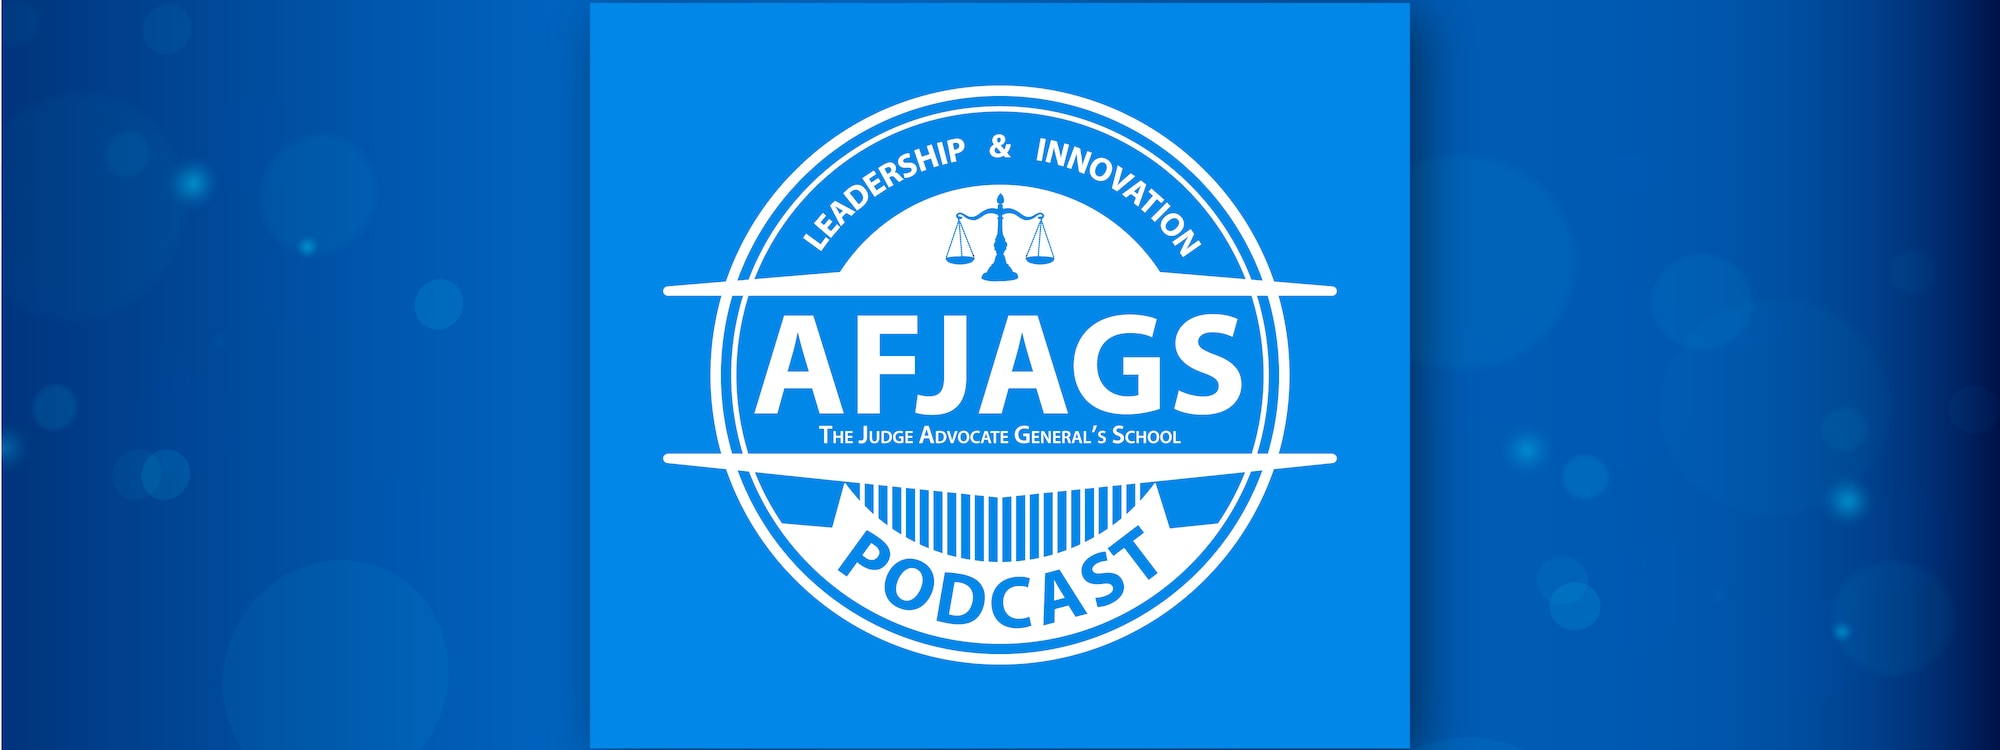 AFJAGS Podcast text over blue background.